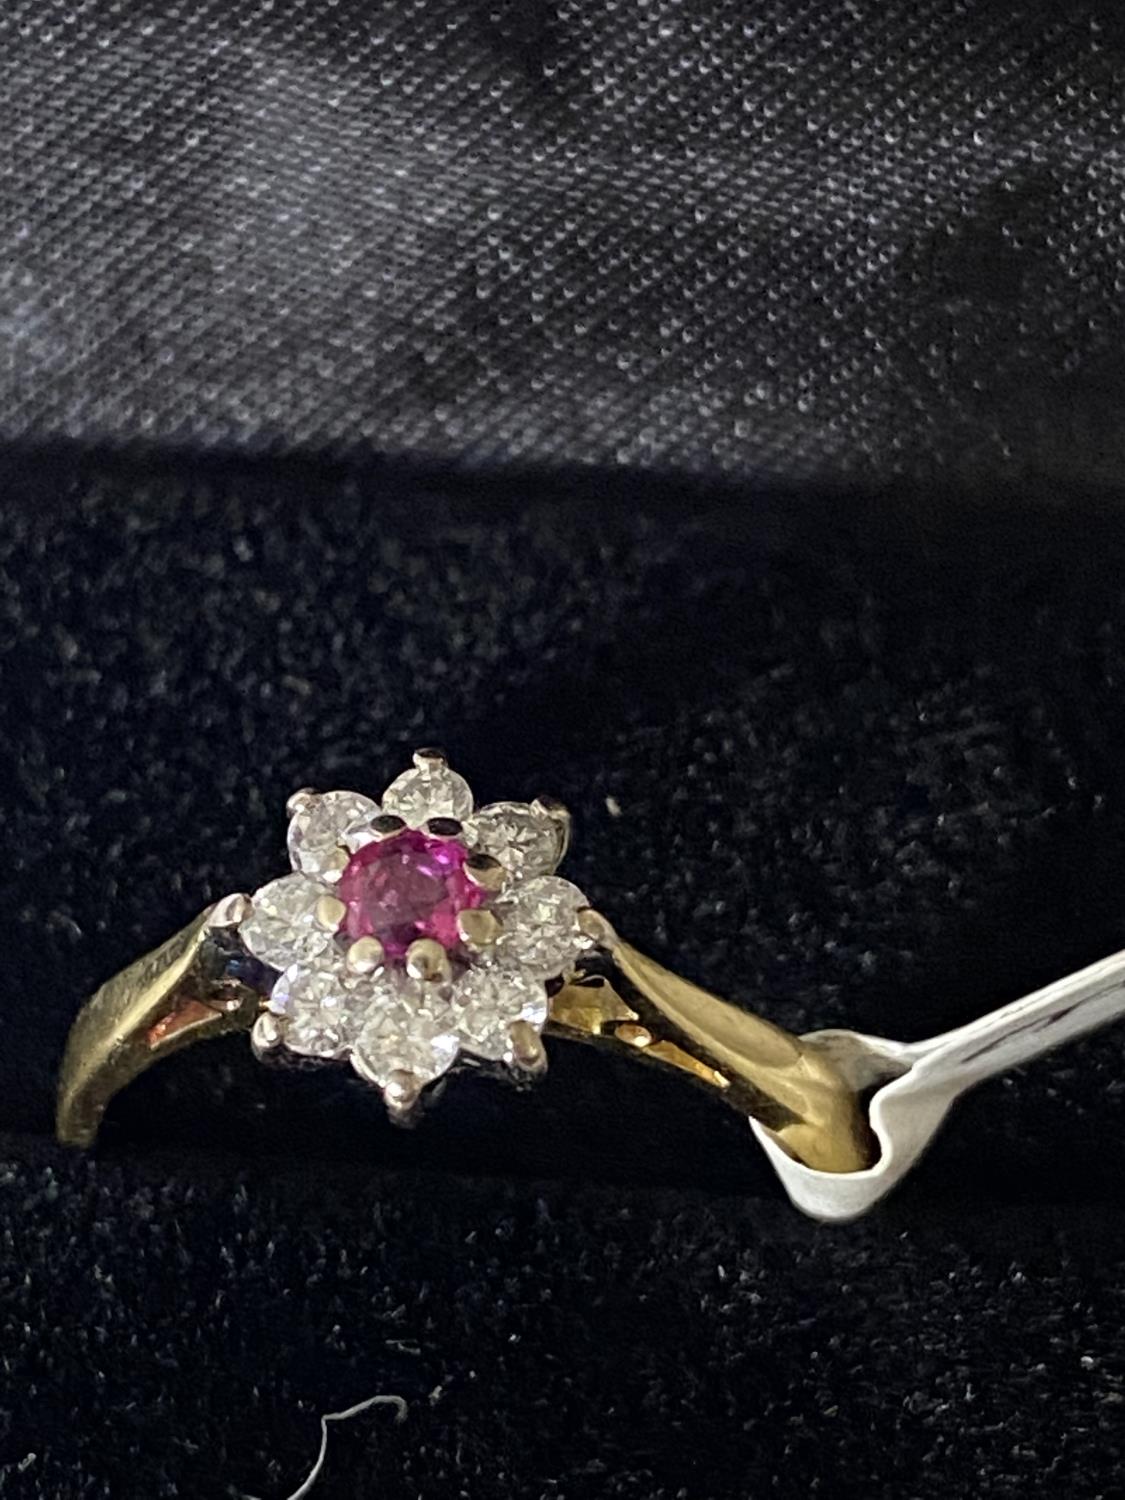 AN 18 CARAT YELLOW GOLD RING WITH CENTRE PINK STONE SURROUNDED BY EIGHT DIAMONDS. WEIGHT 3 GRAMS, - Image 3 of 3